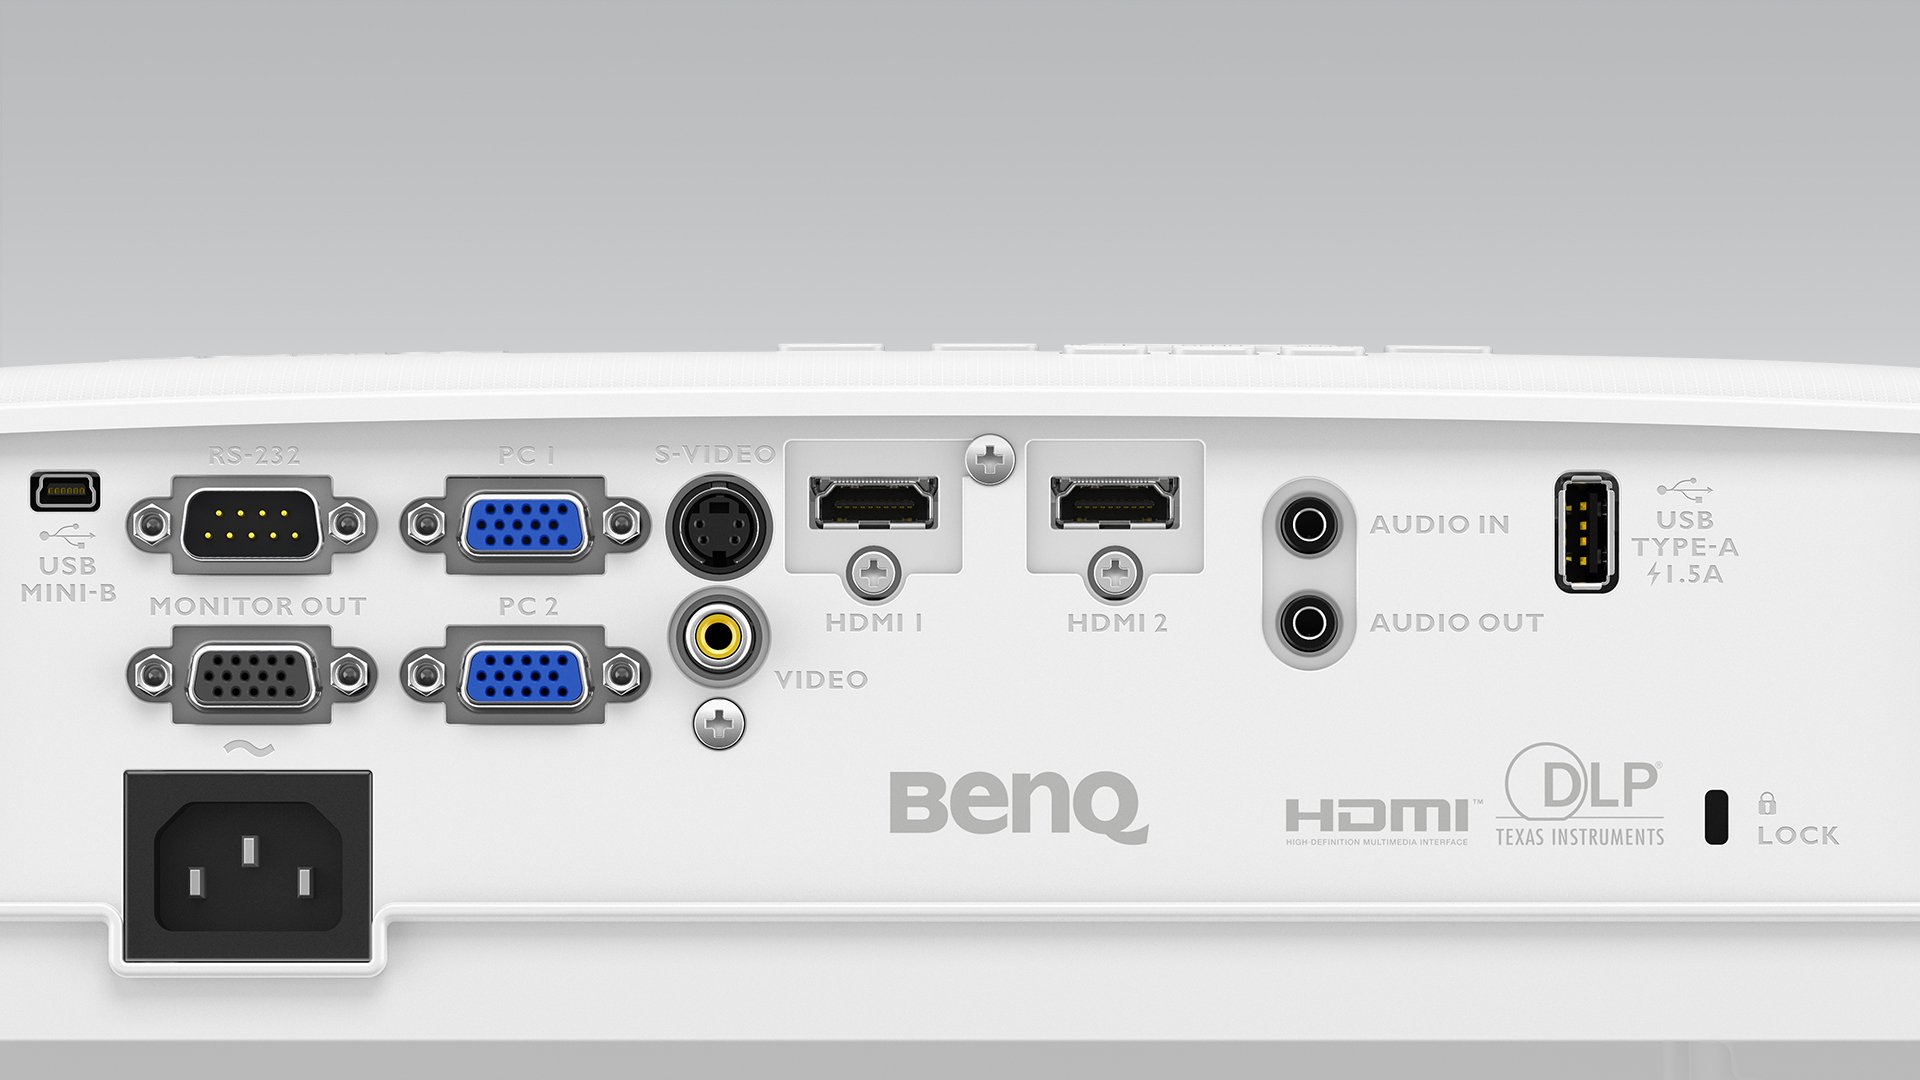 BenQ MX536 io port is with reliable transmission and versatile connectivity